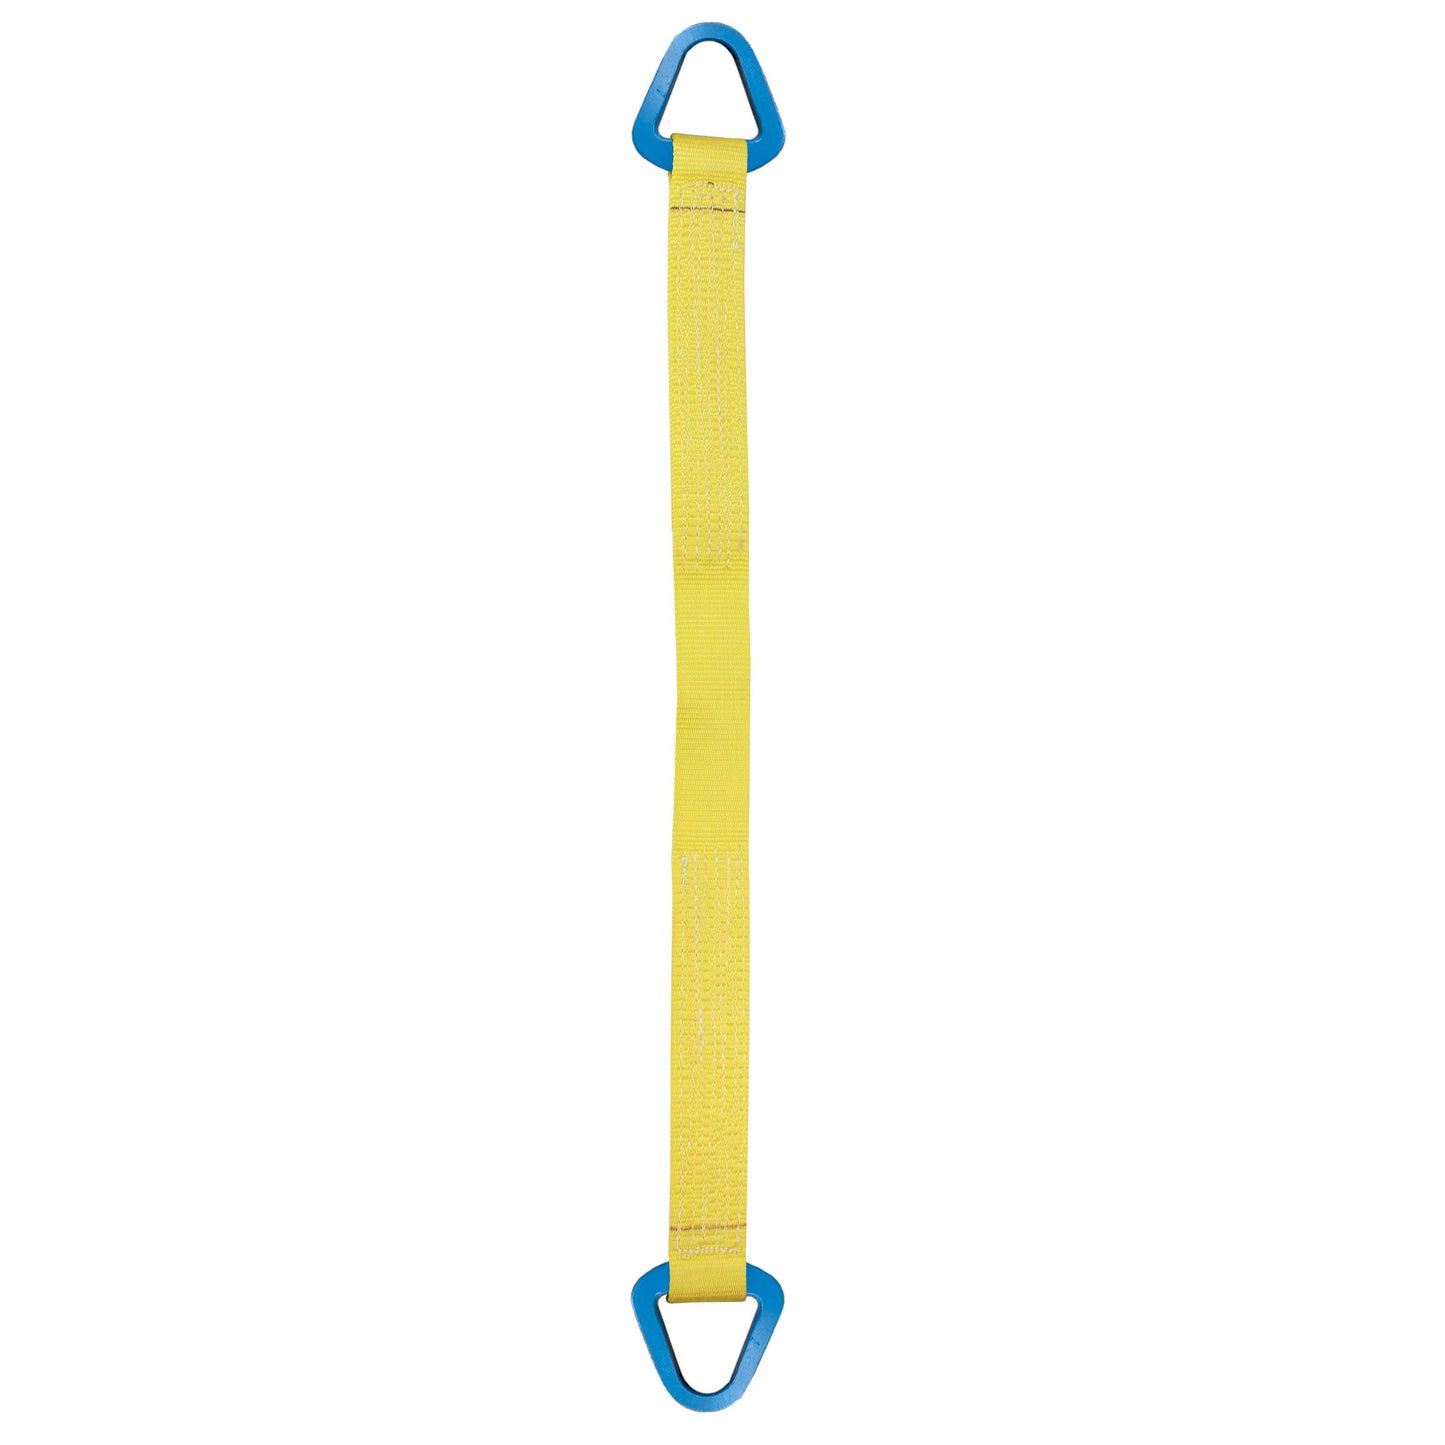 Nylon Lifting Sling Triangle 6 inch x 4 foot 1ply image 1 of 2